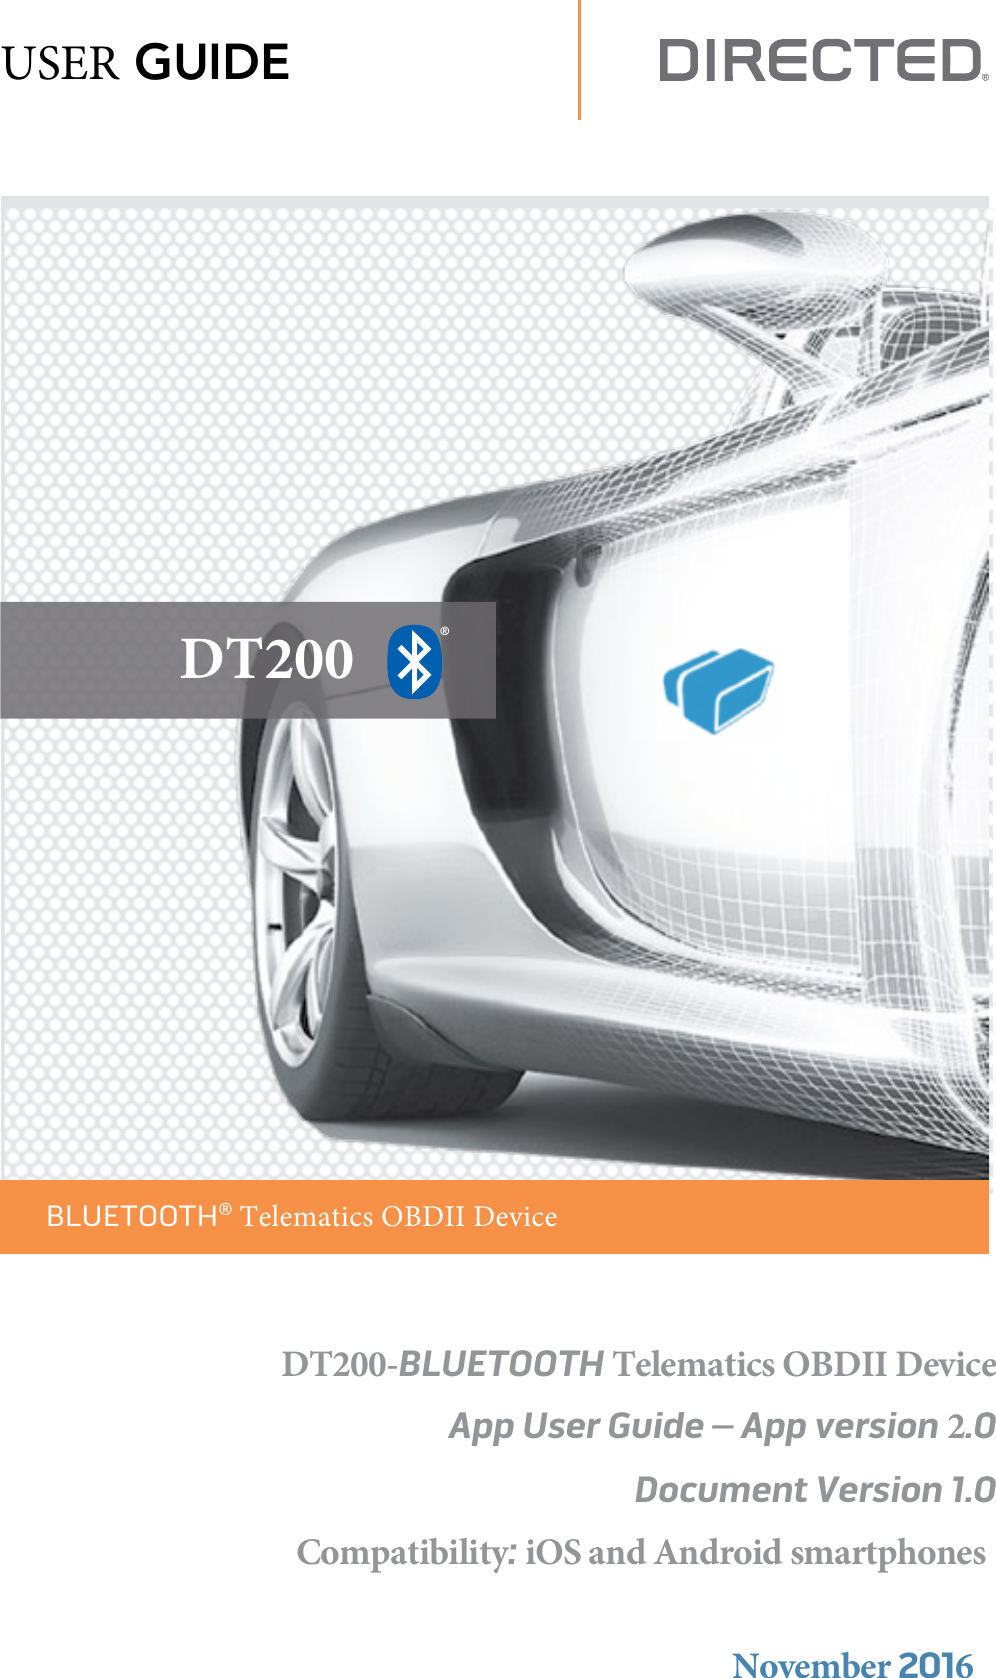   DT200     ® BLUETOOTH® Telematics OBDII DeviceDT200-BLUETOOTH Telematics OBDII Device  App User Guide – App version 2.0 Document Version 1.0  Compatibility: iOS and Android smartphones November 2016USER GUIDE